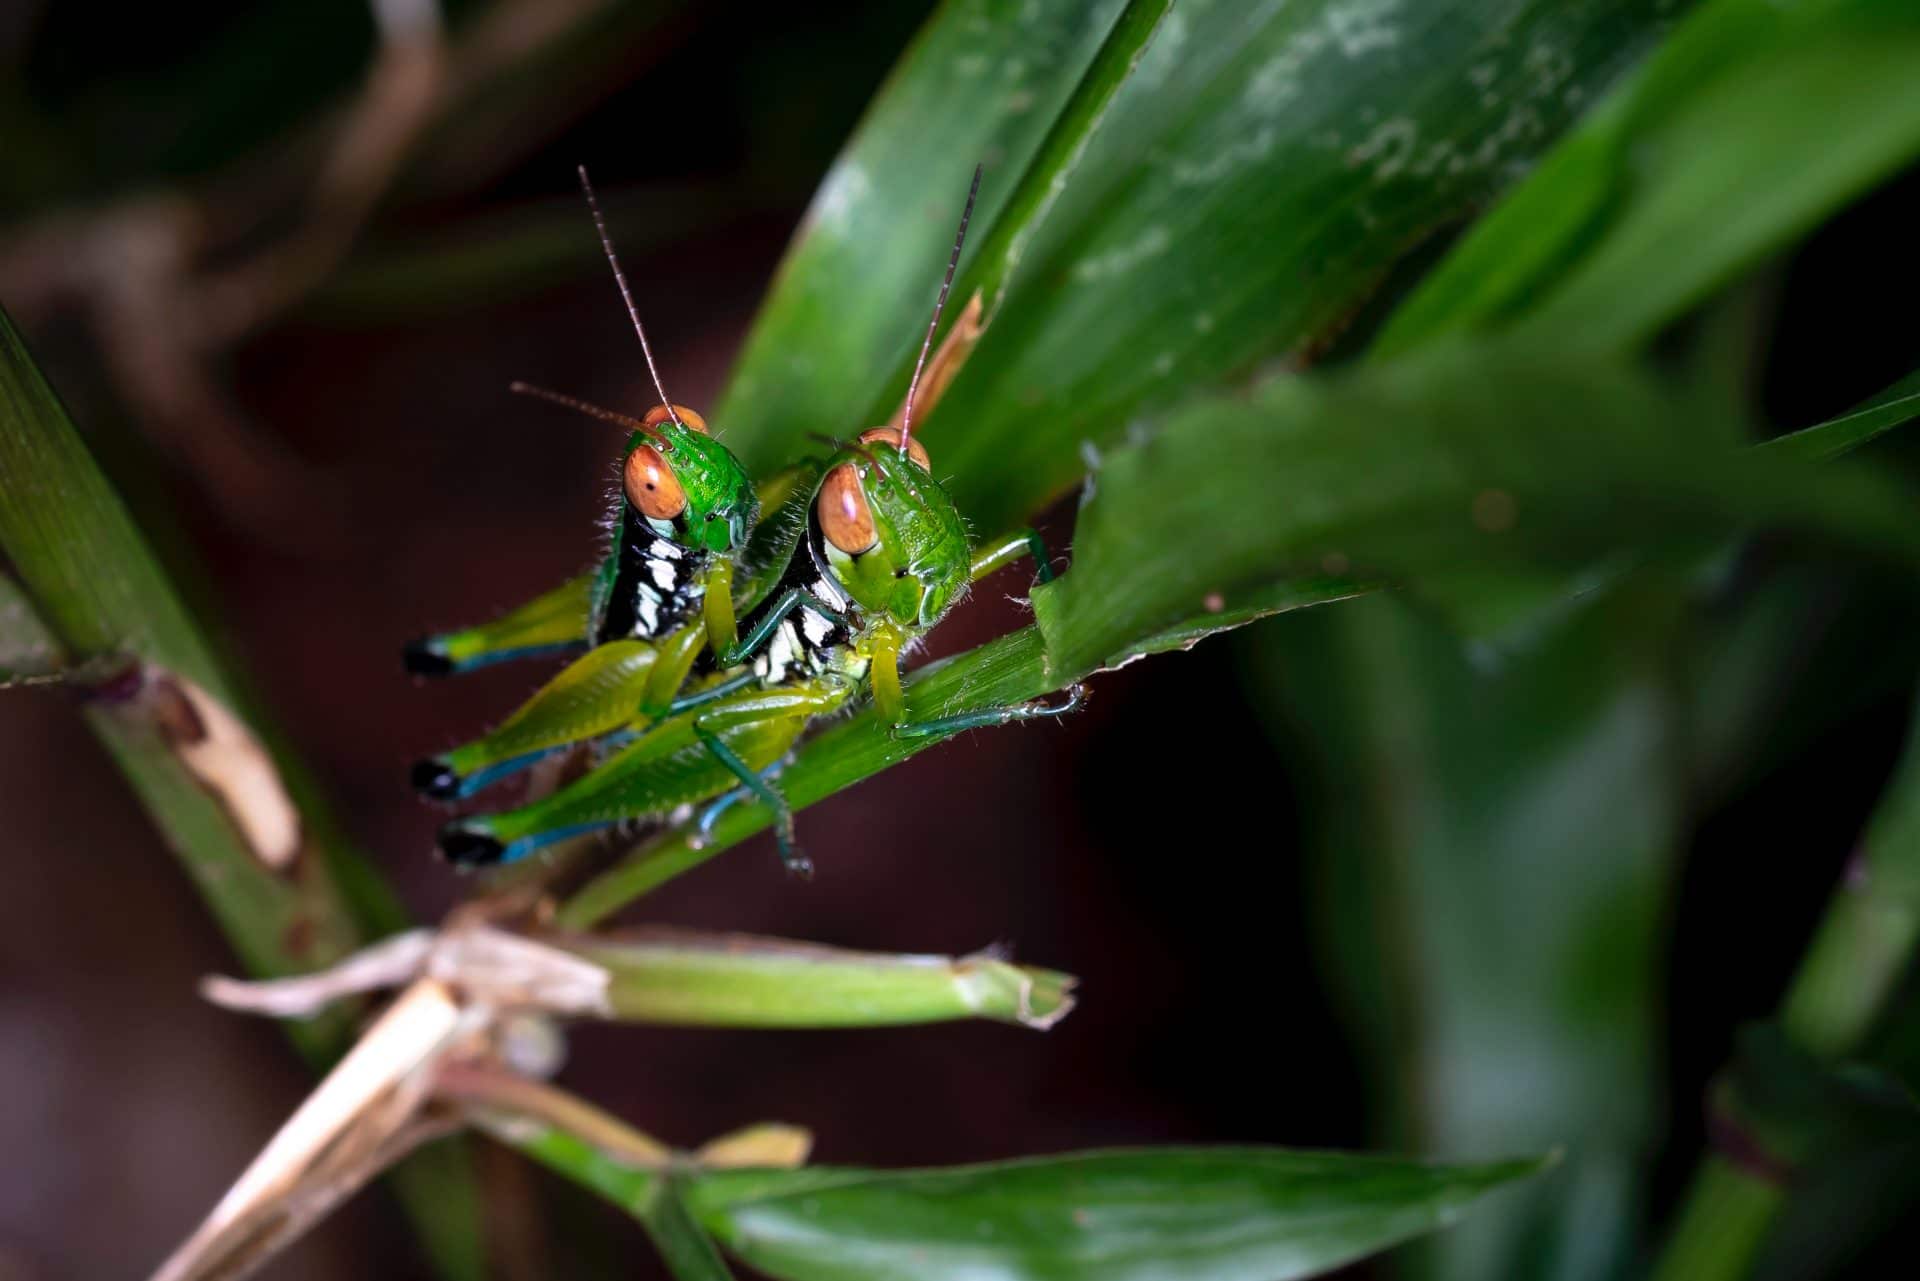 Two grasshoppers on a leaf